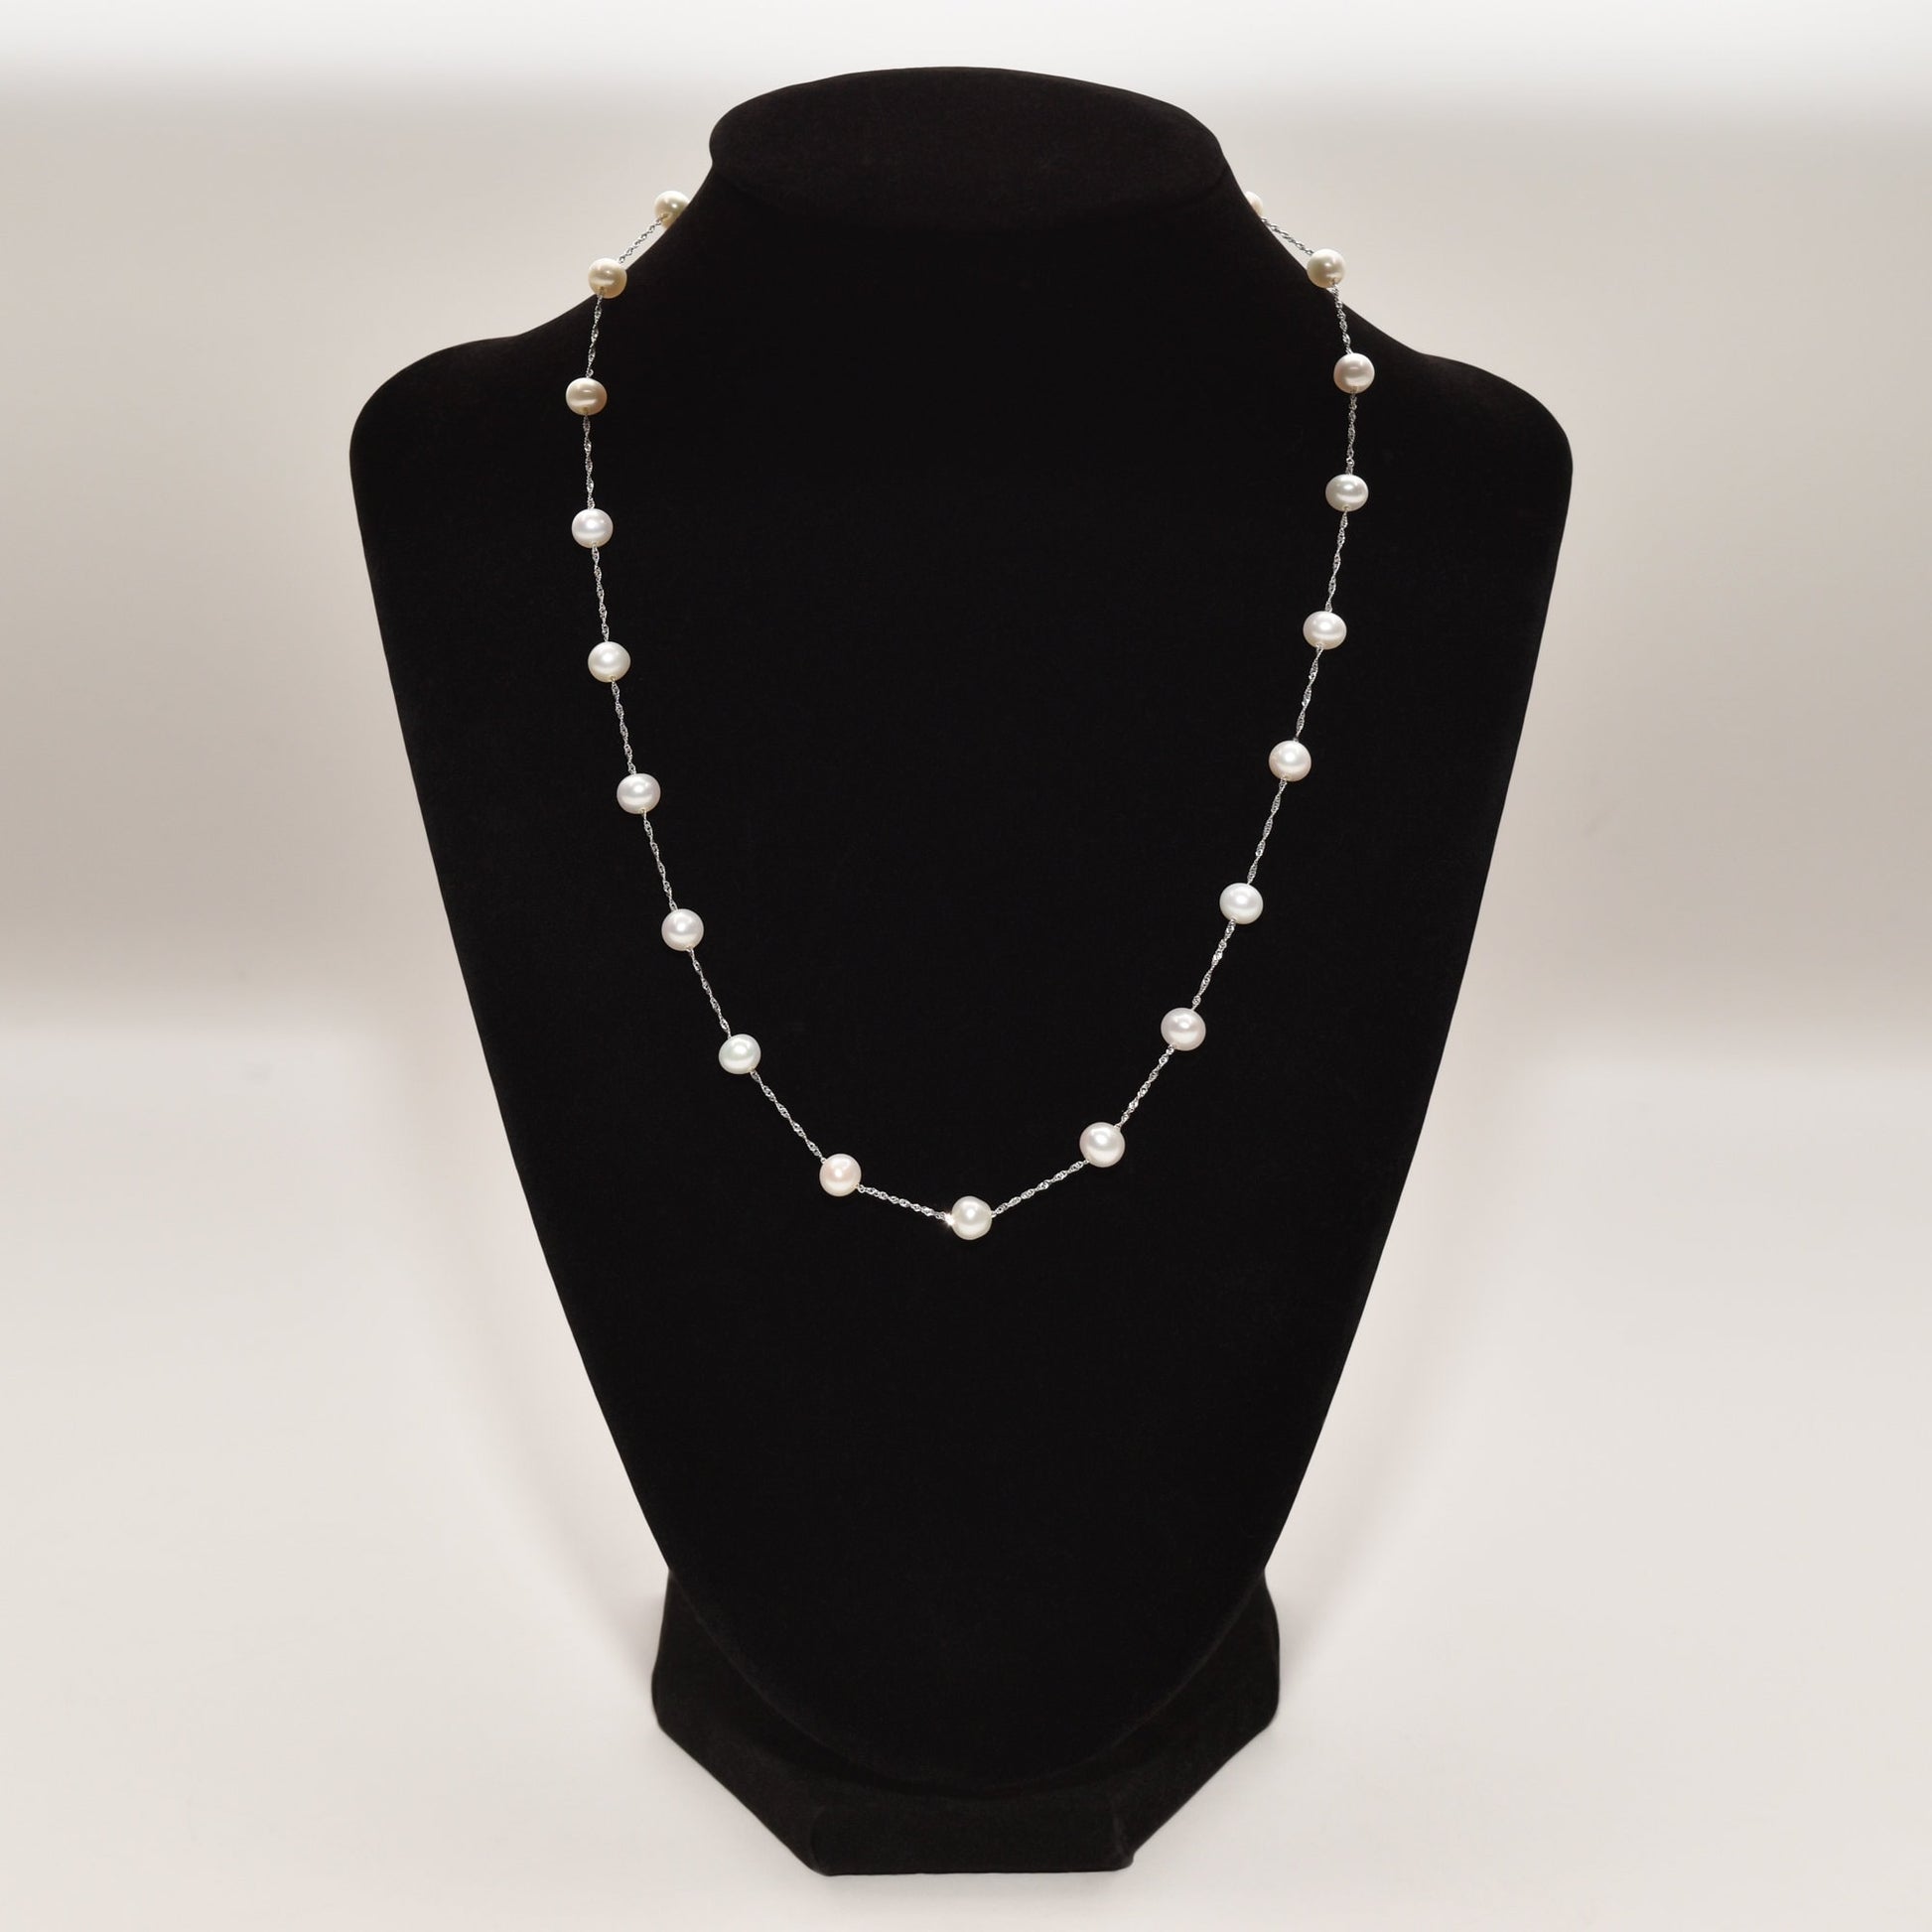 White pearl choker necklace in 14K white gold on a black display stand, featuring evenly spaced pearls in an elegant station design, measuring 17.75 inches in length.